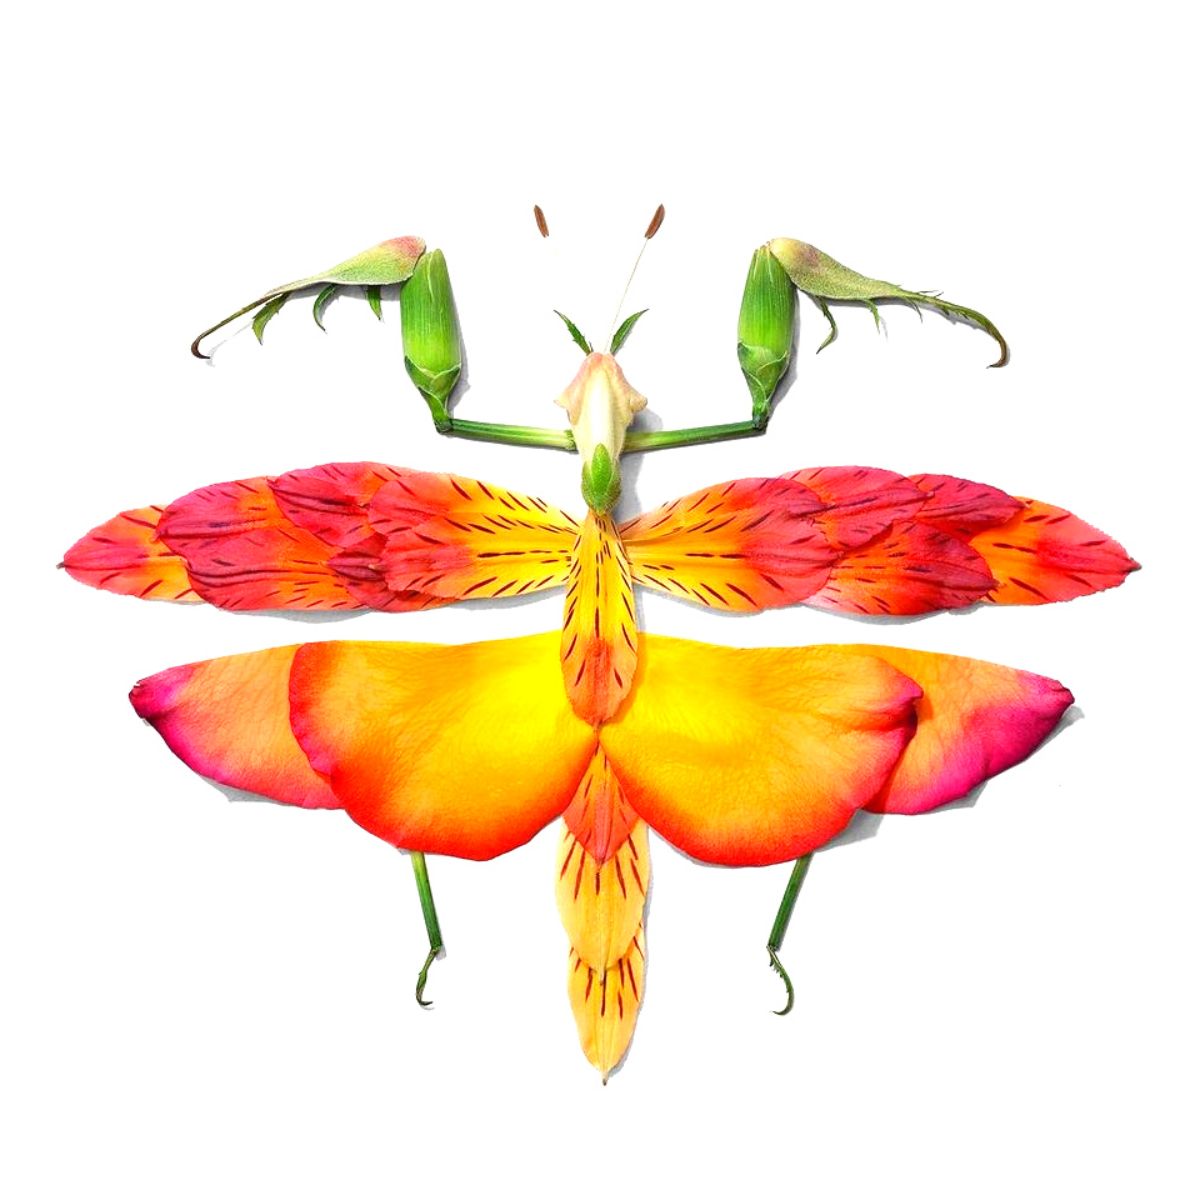 Praying mantis mixed with butterfly flowers